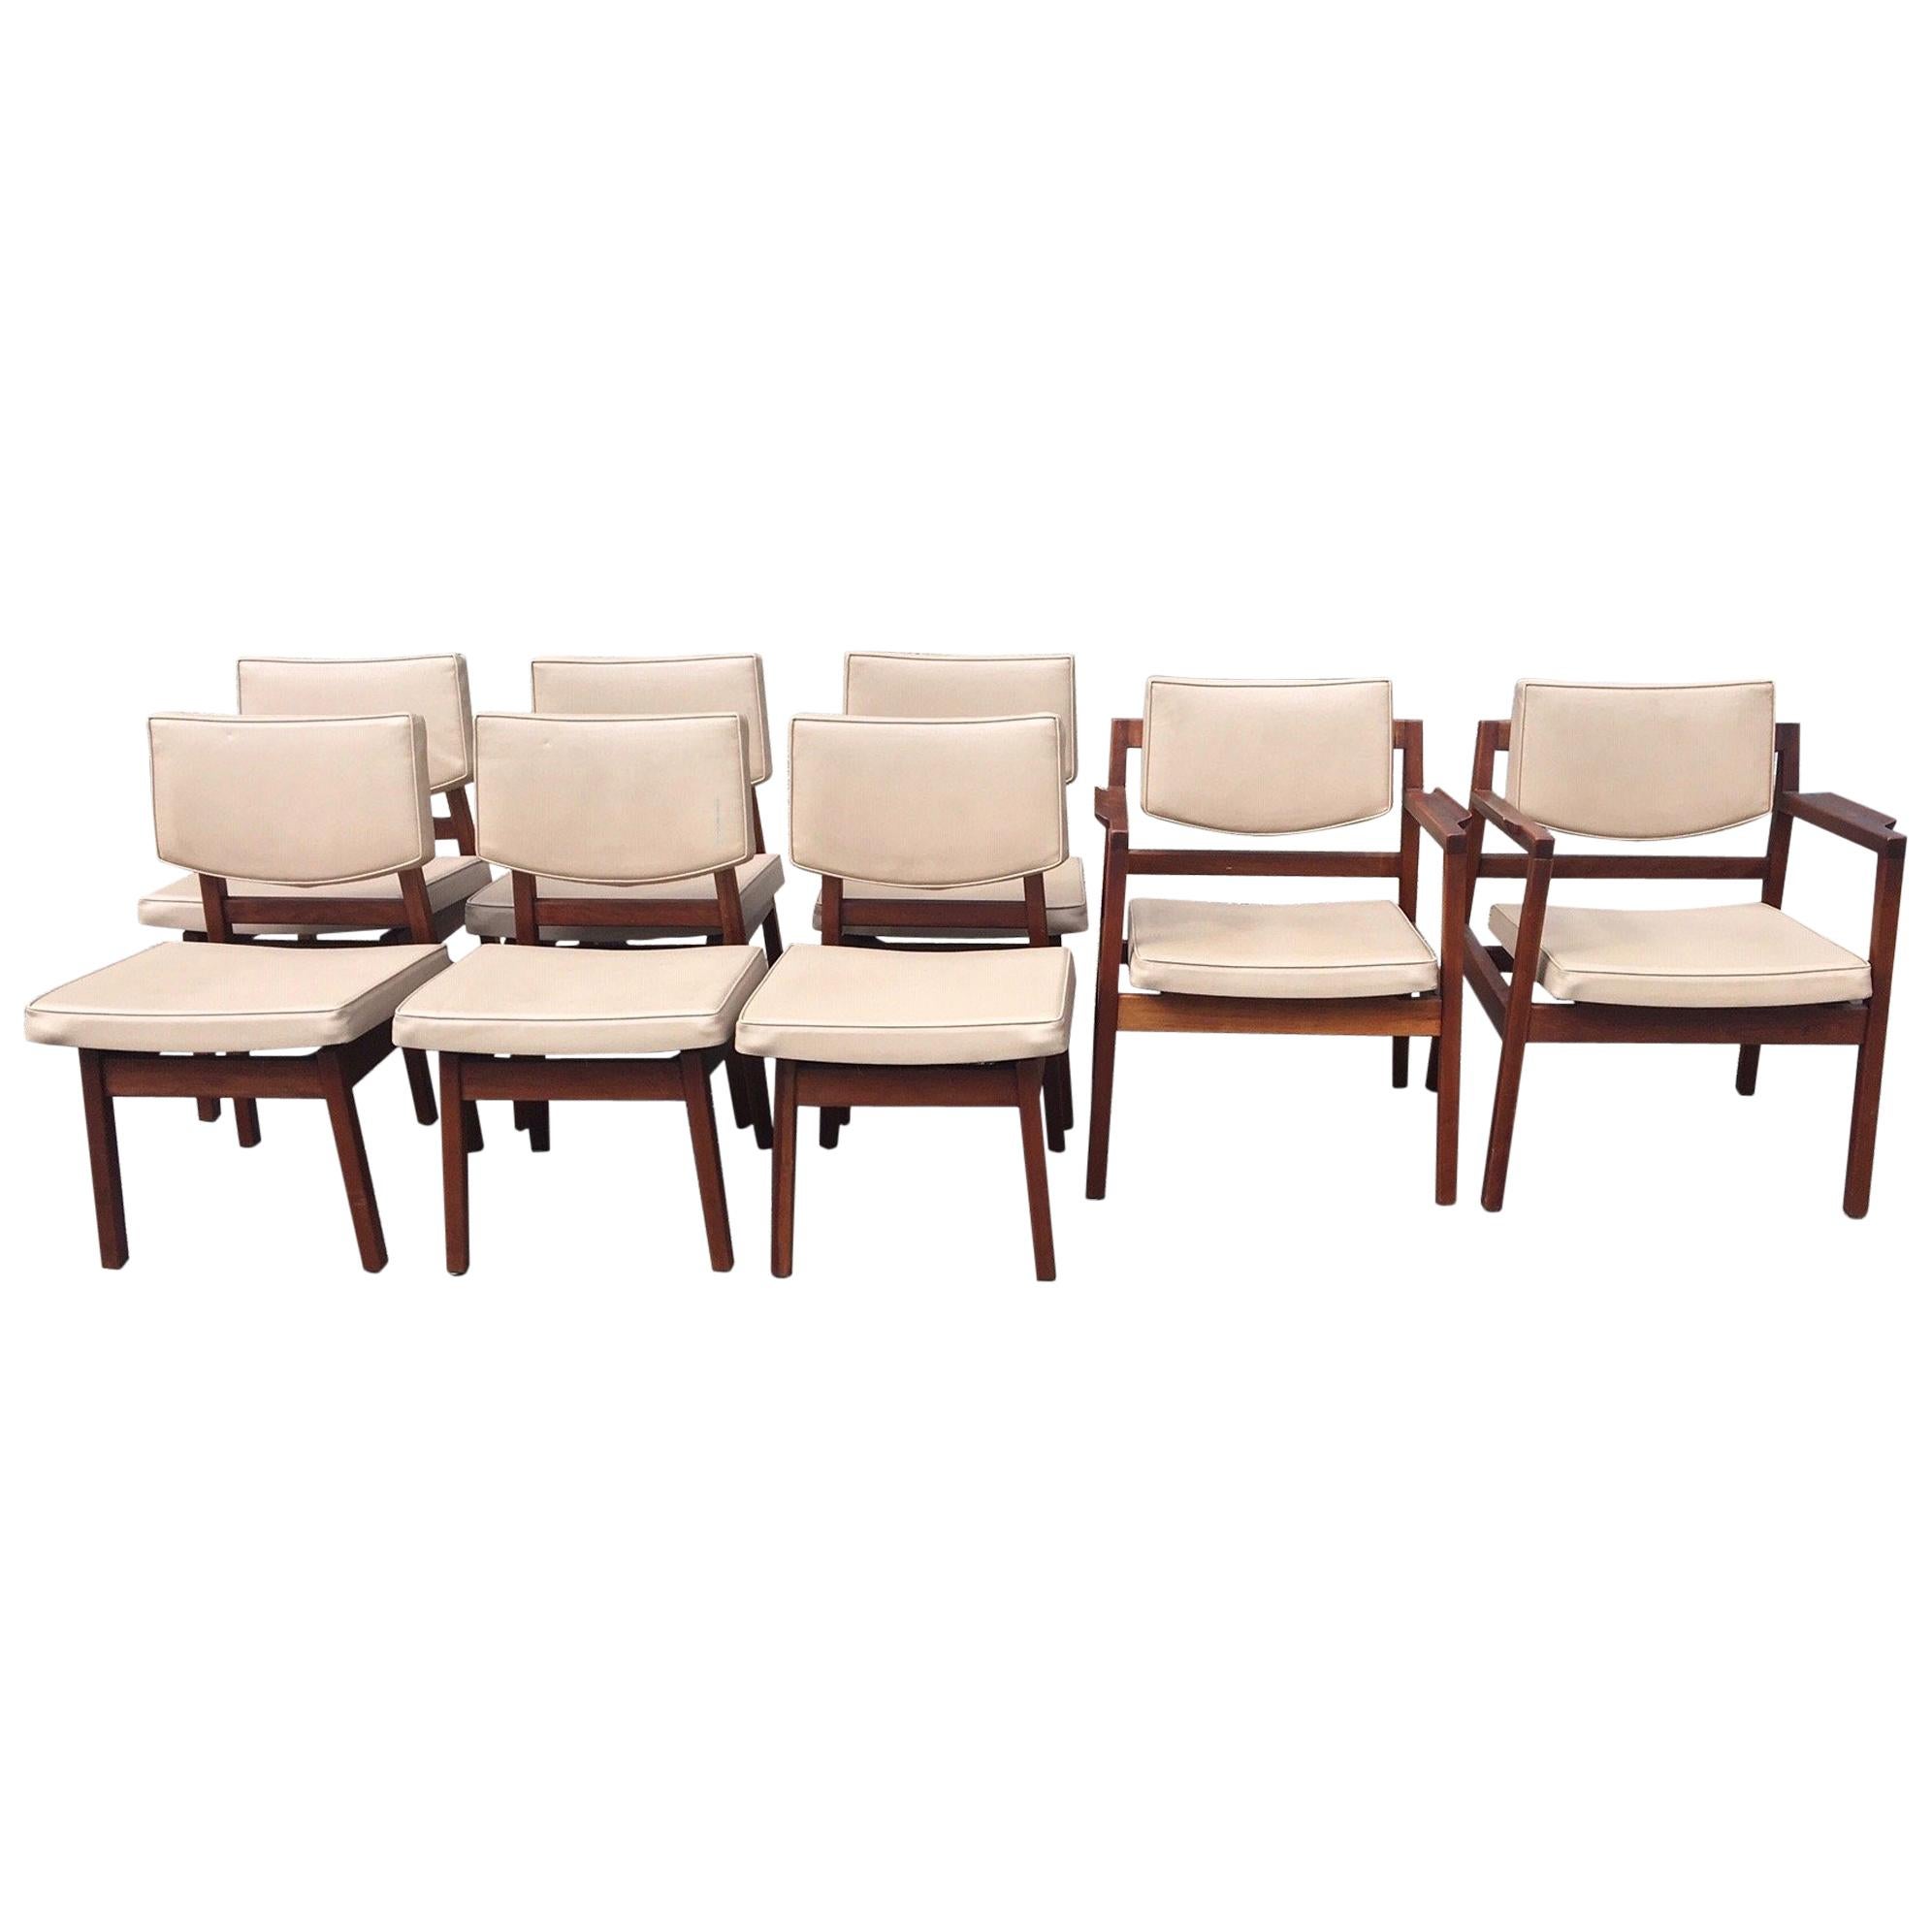 Set of 8 Original Jens Risom Walnut Dining Chairs in Original Leather Upholstery